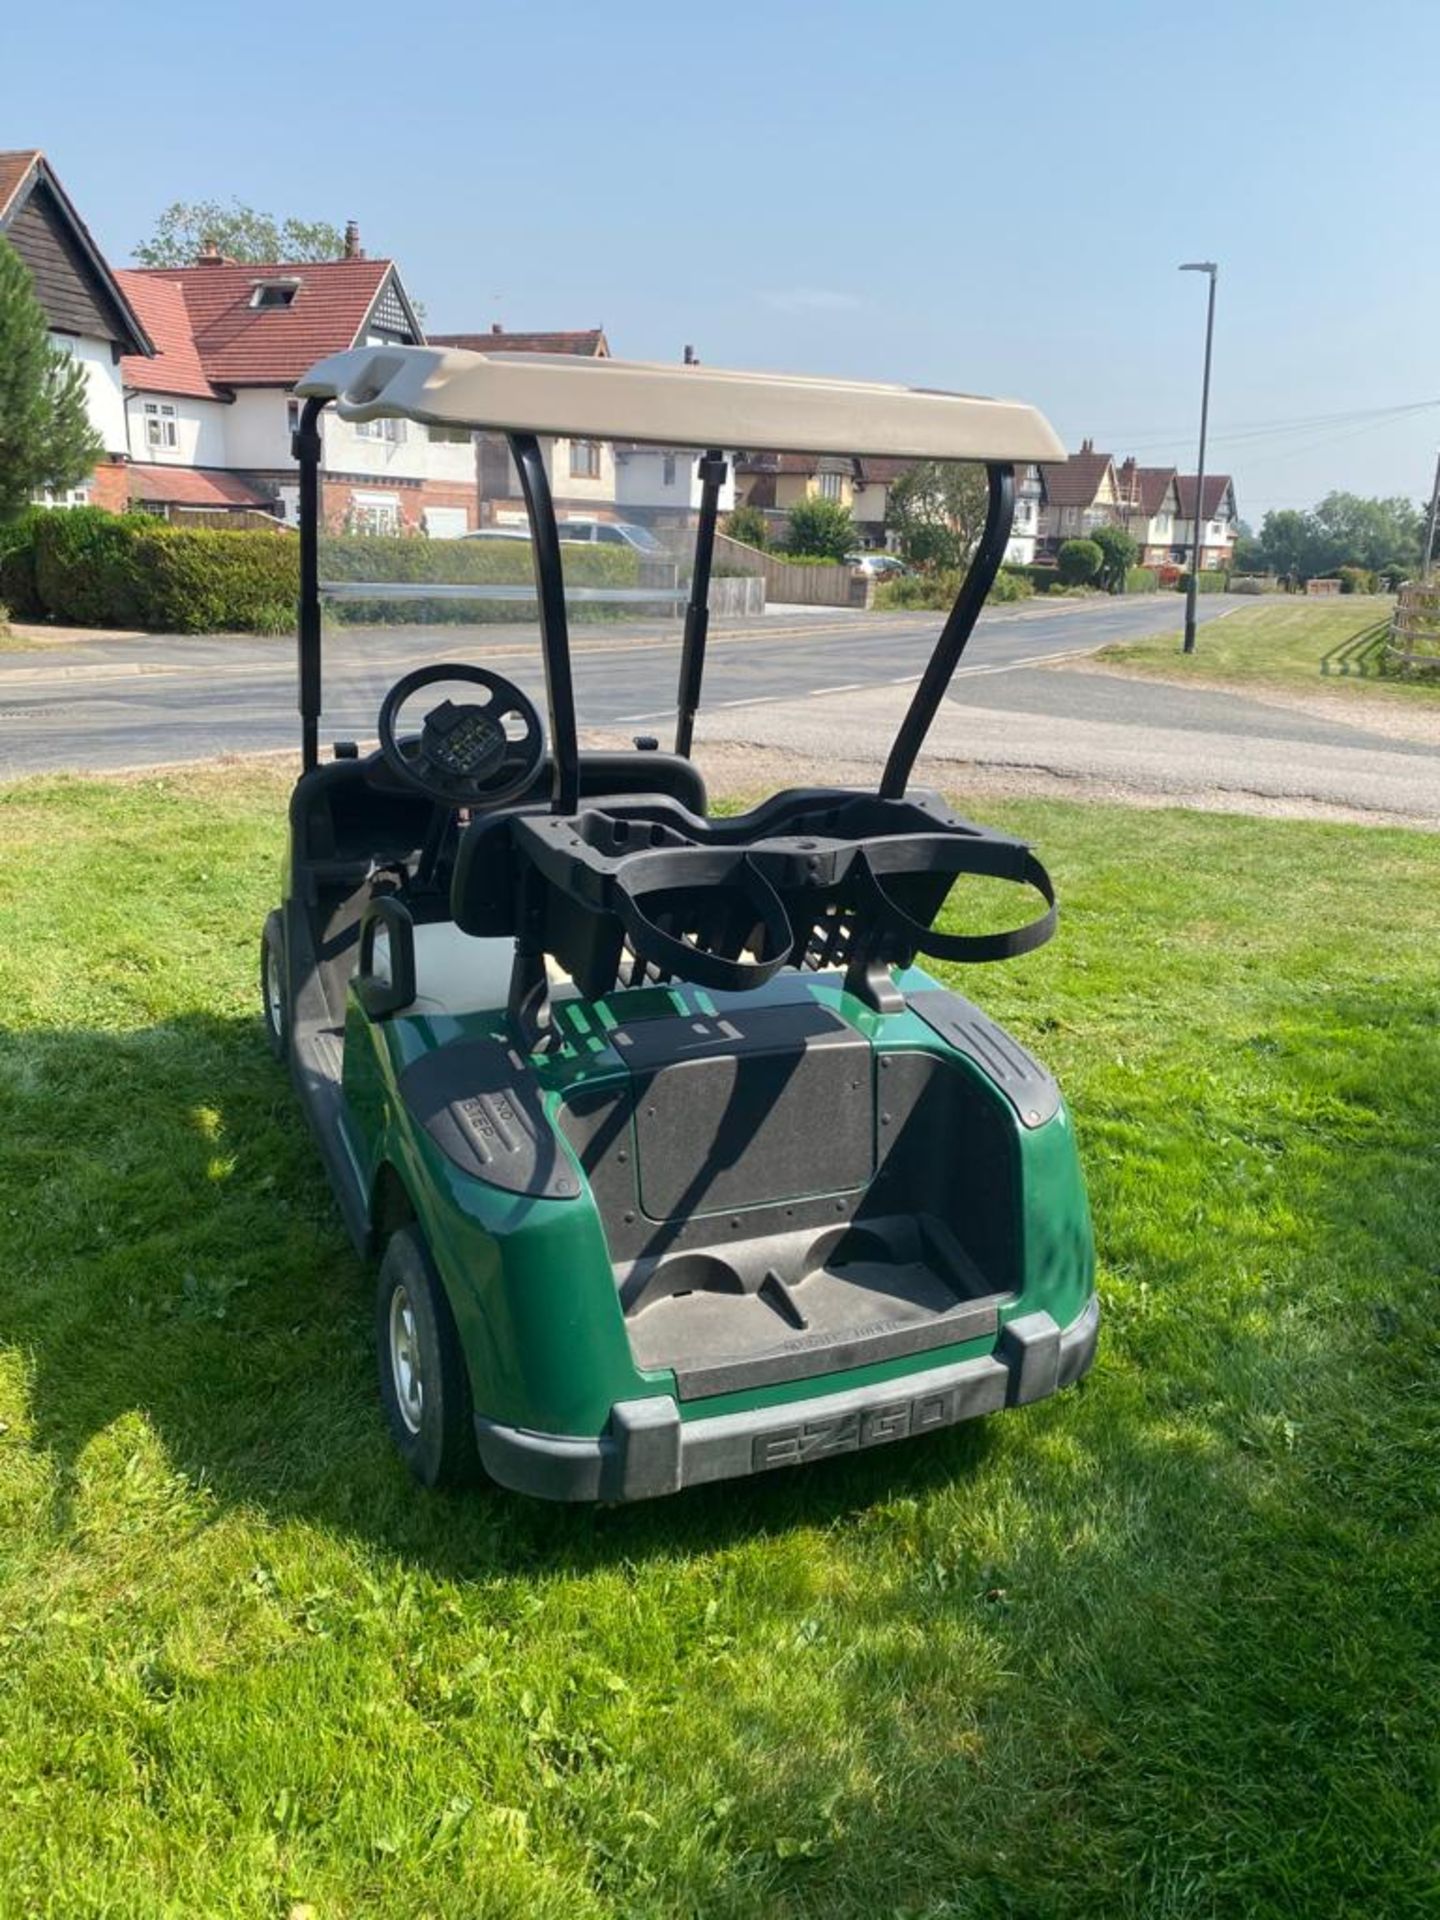 EZGO ELECTRIC GOLF BUGGY, FULL SUN CANOPY, YEAR 03/17, IN LOVELY CONDITION *PLUS VAT* - Image 2 of 5